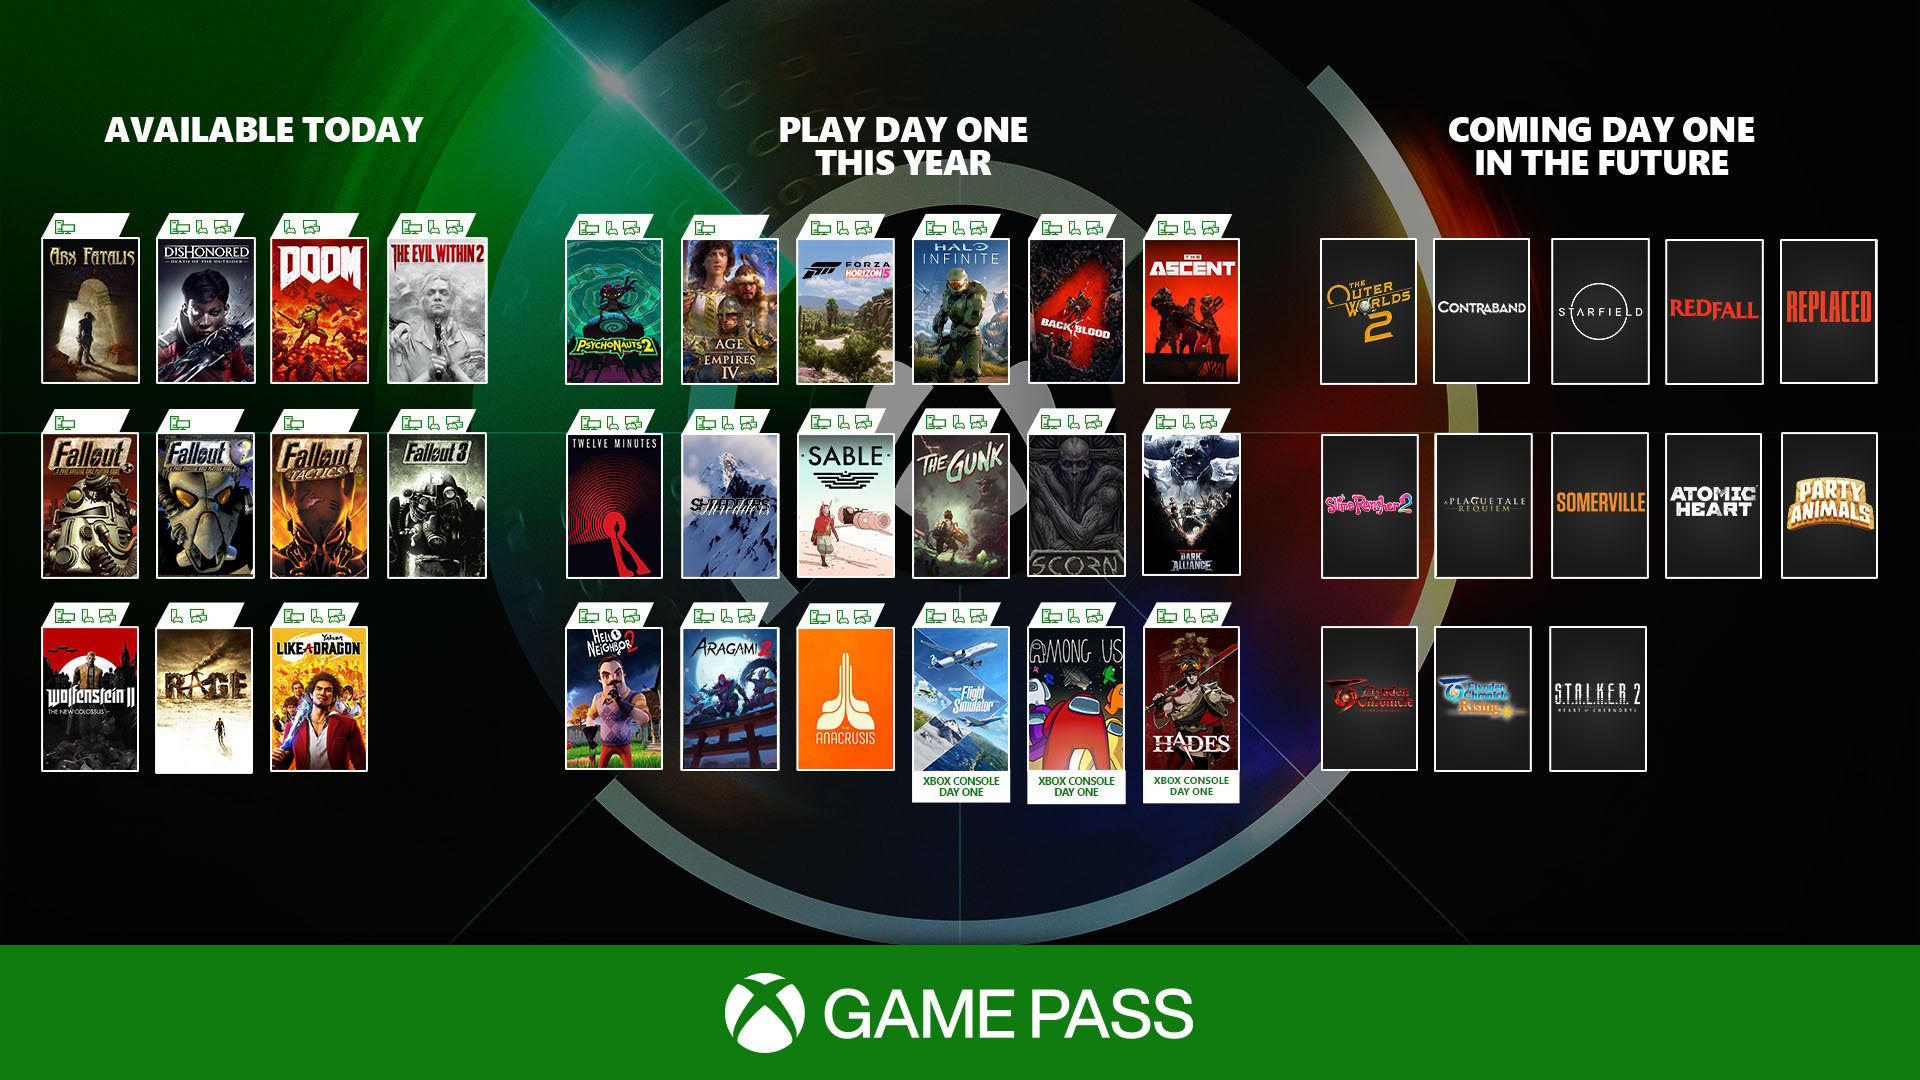 Xbox Game Pass PC will cost $4.99, Microsoft reveals ahead of E3 – Gameverse